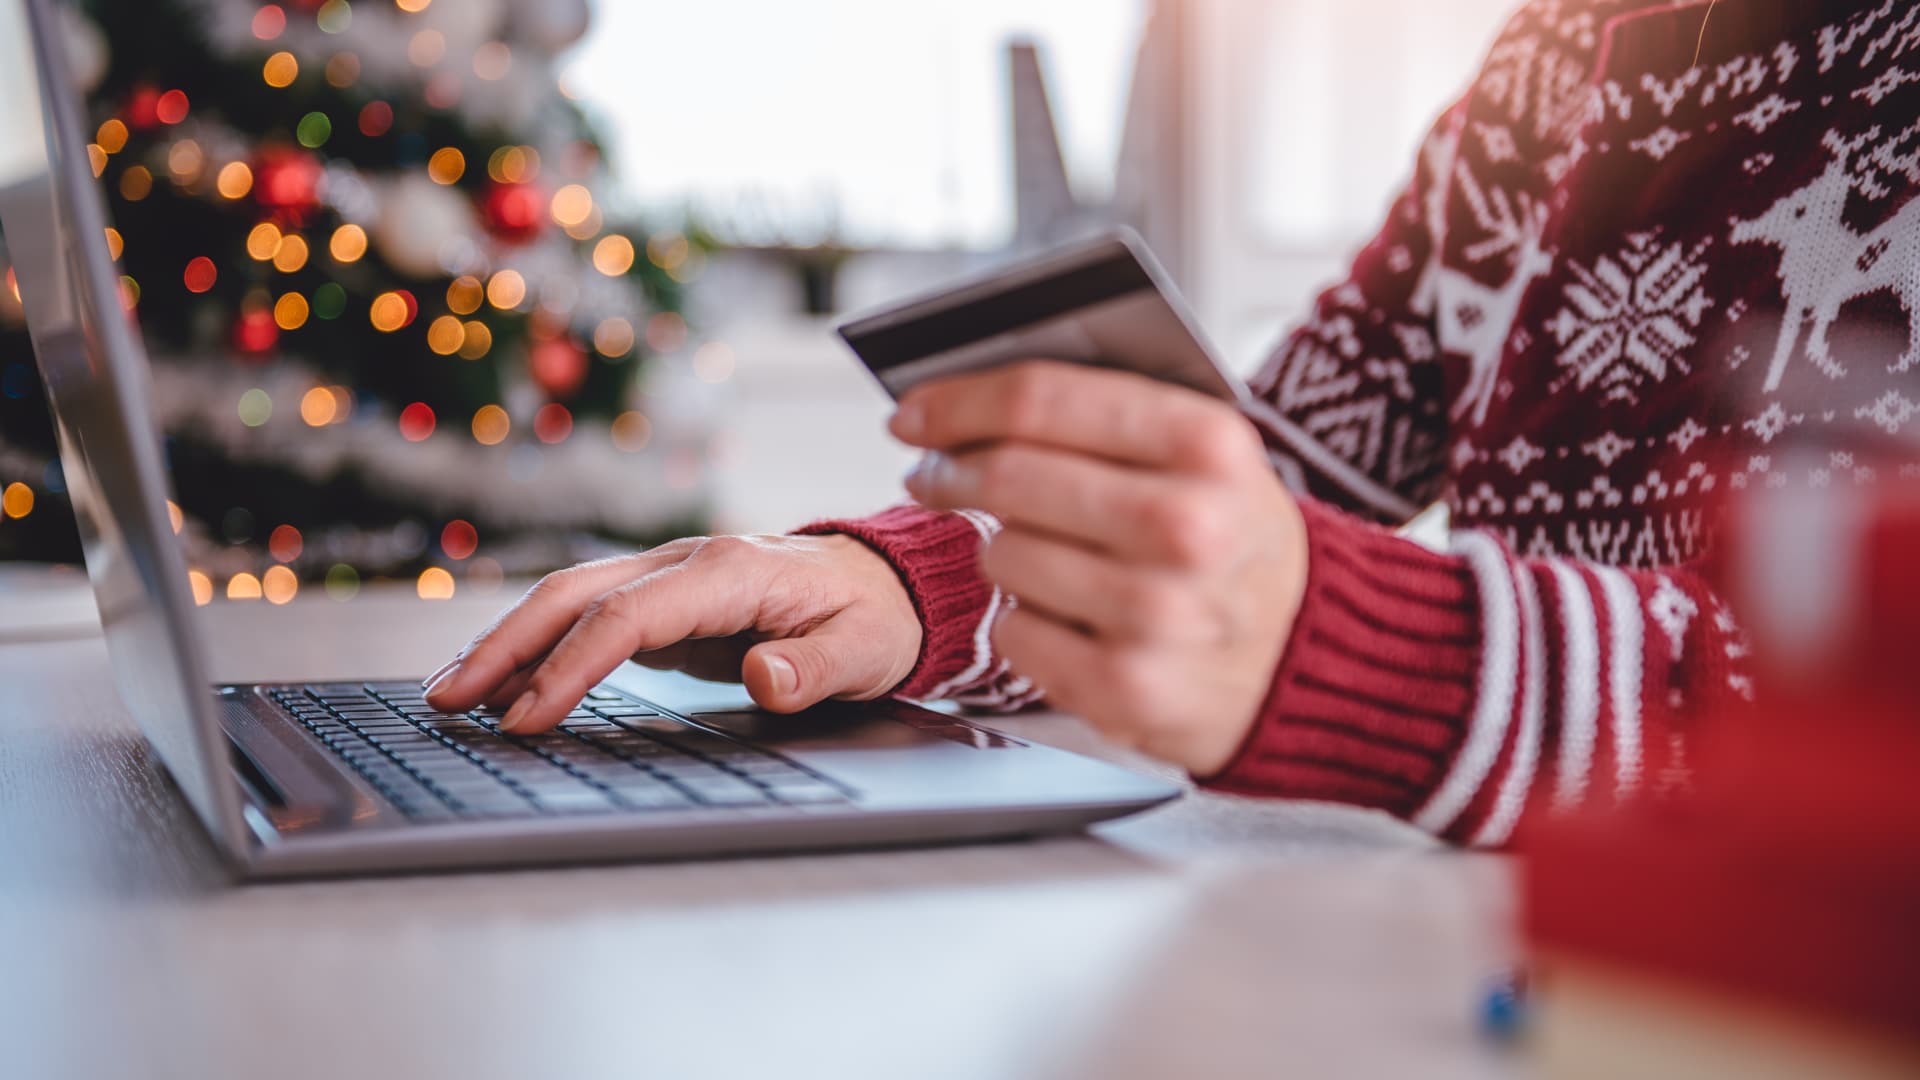 Online shopping overtakes major part of retail for first time ever